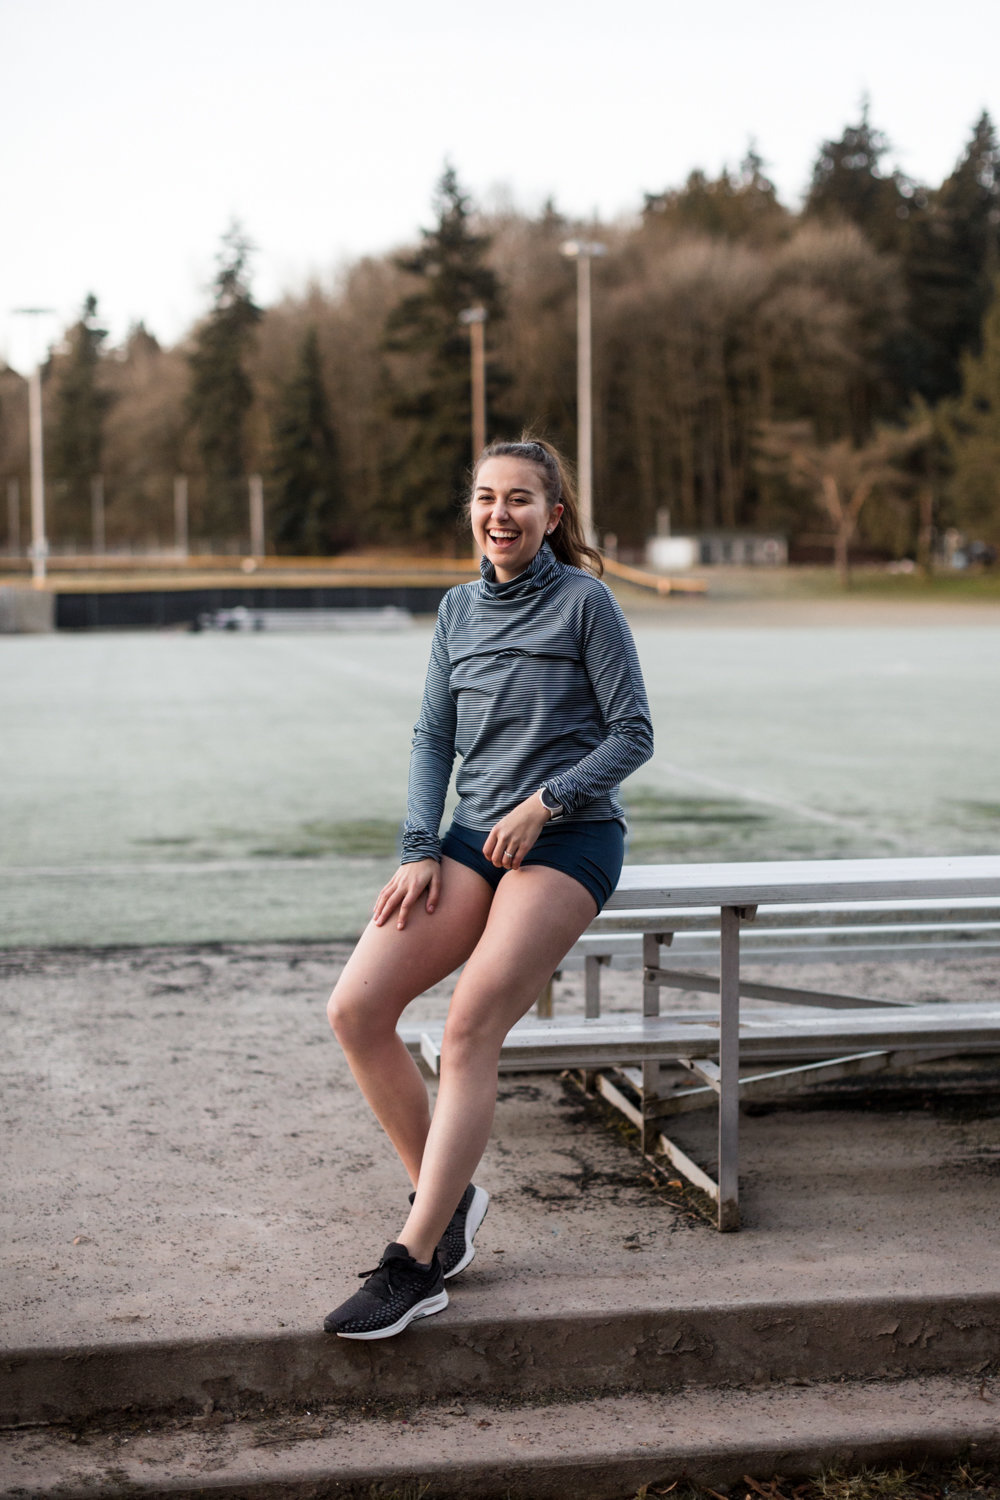 Oiselle Spring Collection by Danielle Motif Photography